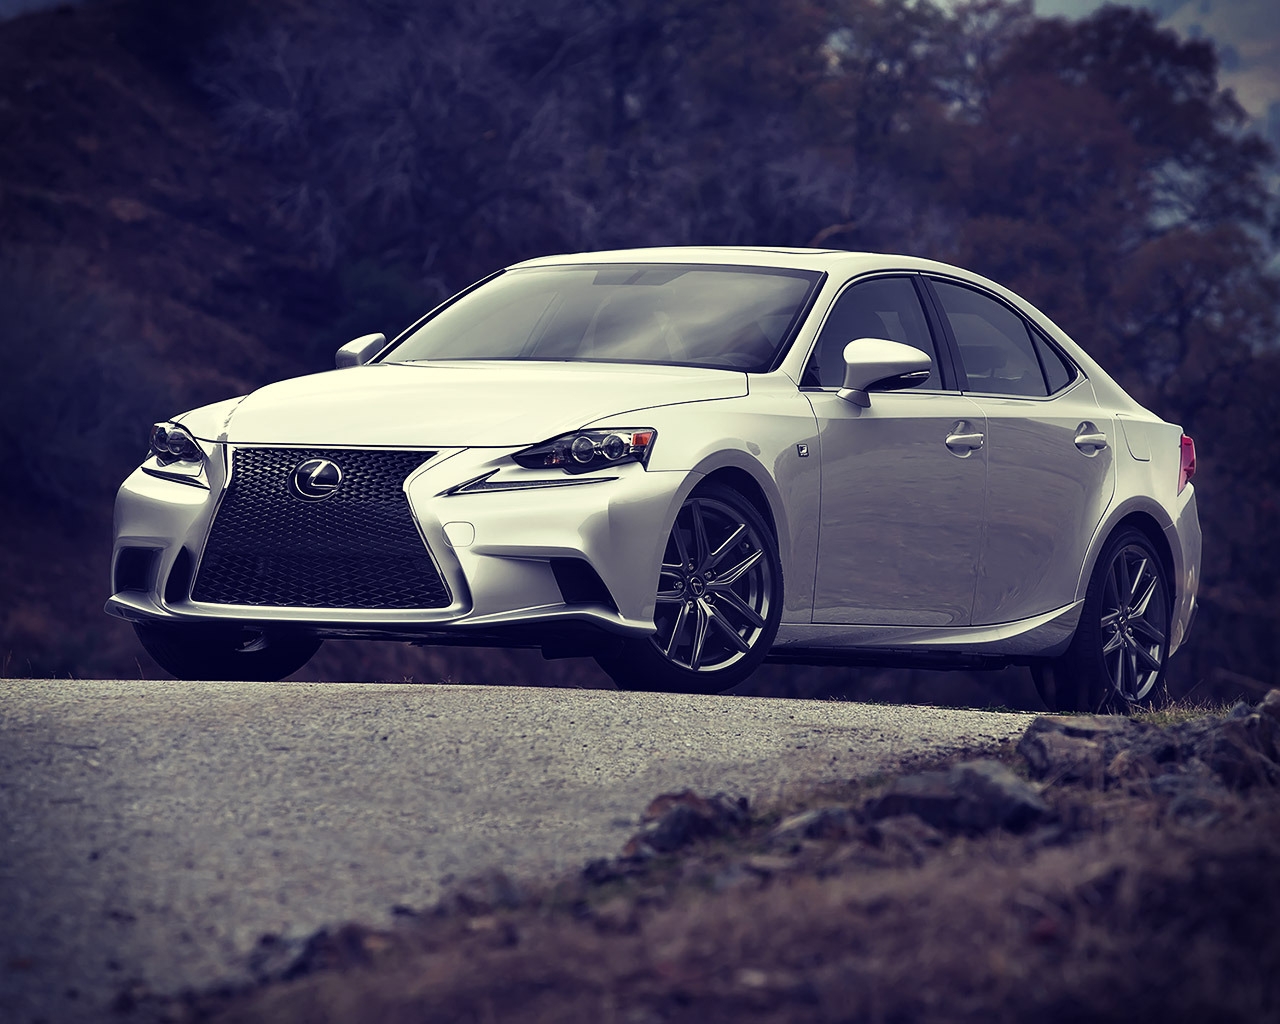 Lexus IS 2014 for 1280 x 1024 resolution